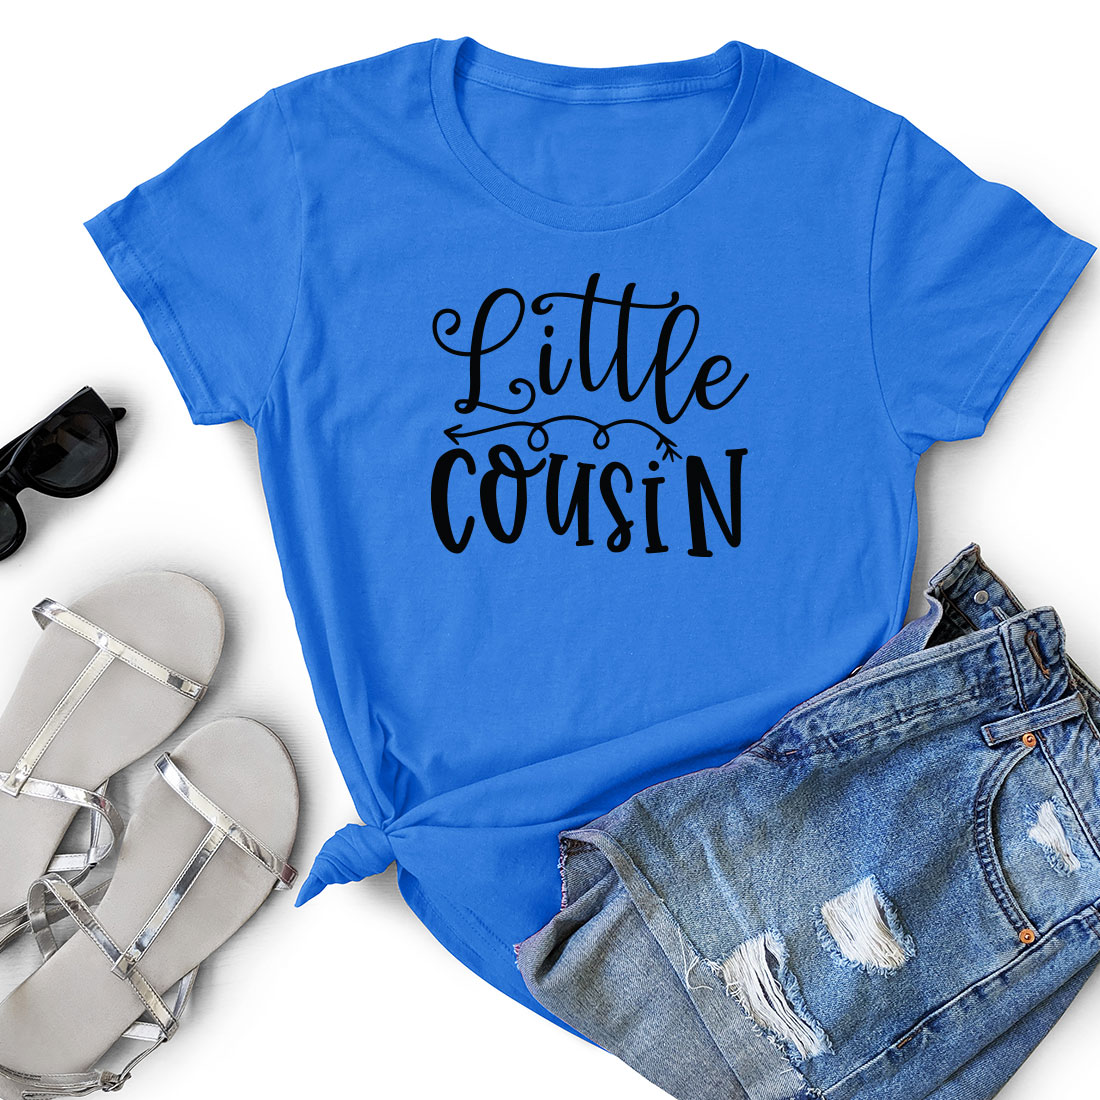 T - shirt that says little cousin next to a pair of shorts.